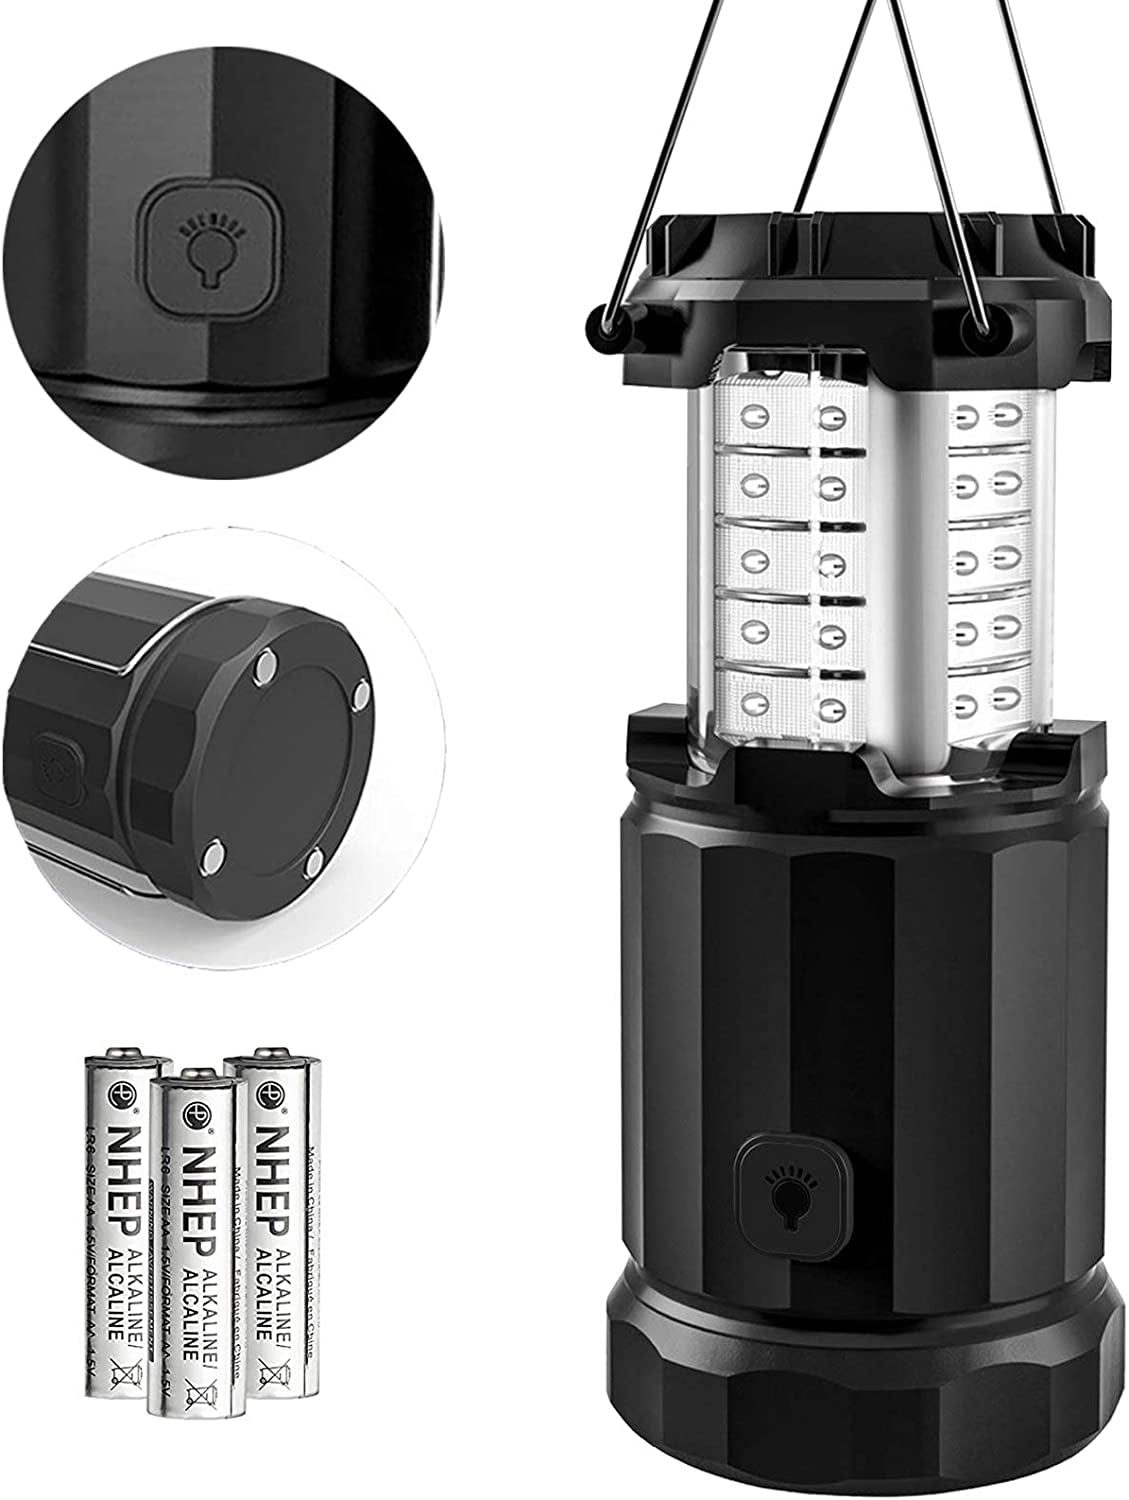 Etekcity LED Camping Lanterns are a steal at